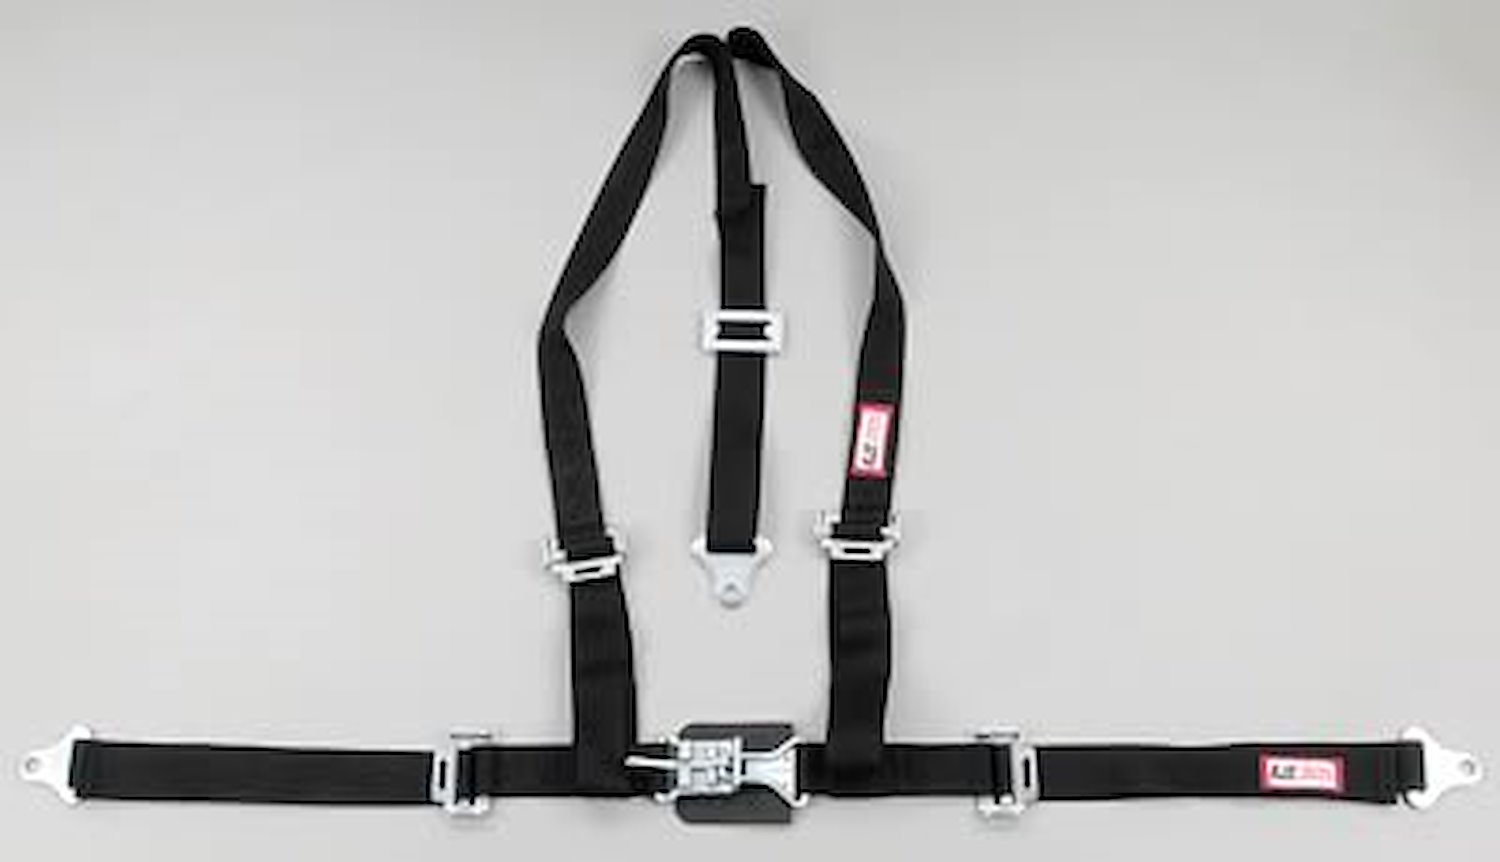 NON-SFI L&L HARNESS 2 PULL UP Lap Belt SEWN IN 2 S.H. V ROLL BAR Mount ALL BOLT ENDS GRAY